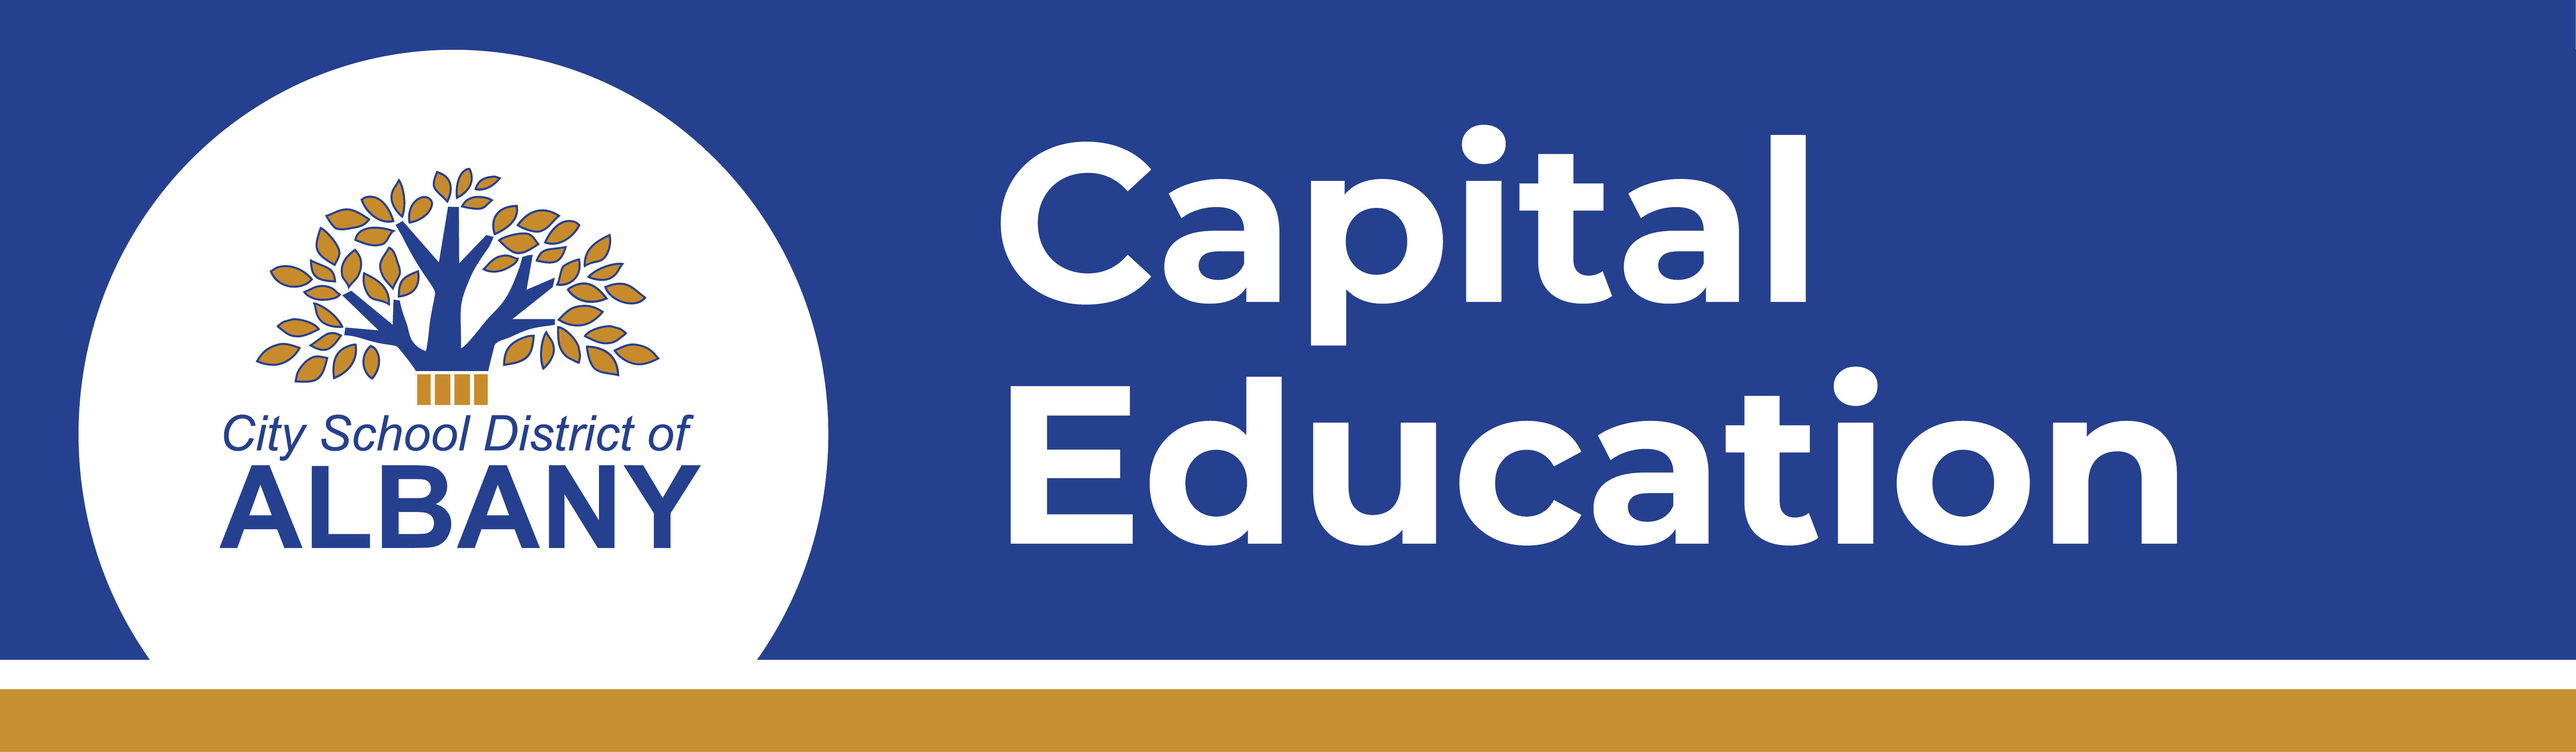 Banner that reads "Capital Education" with the district logo